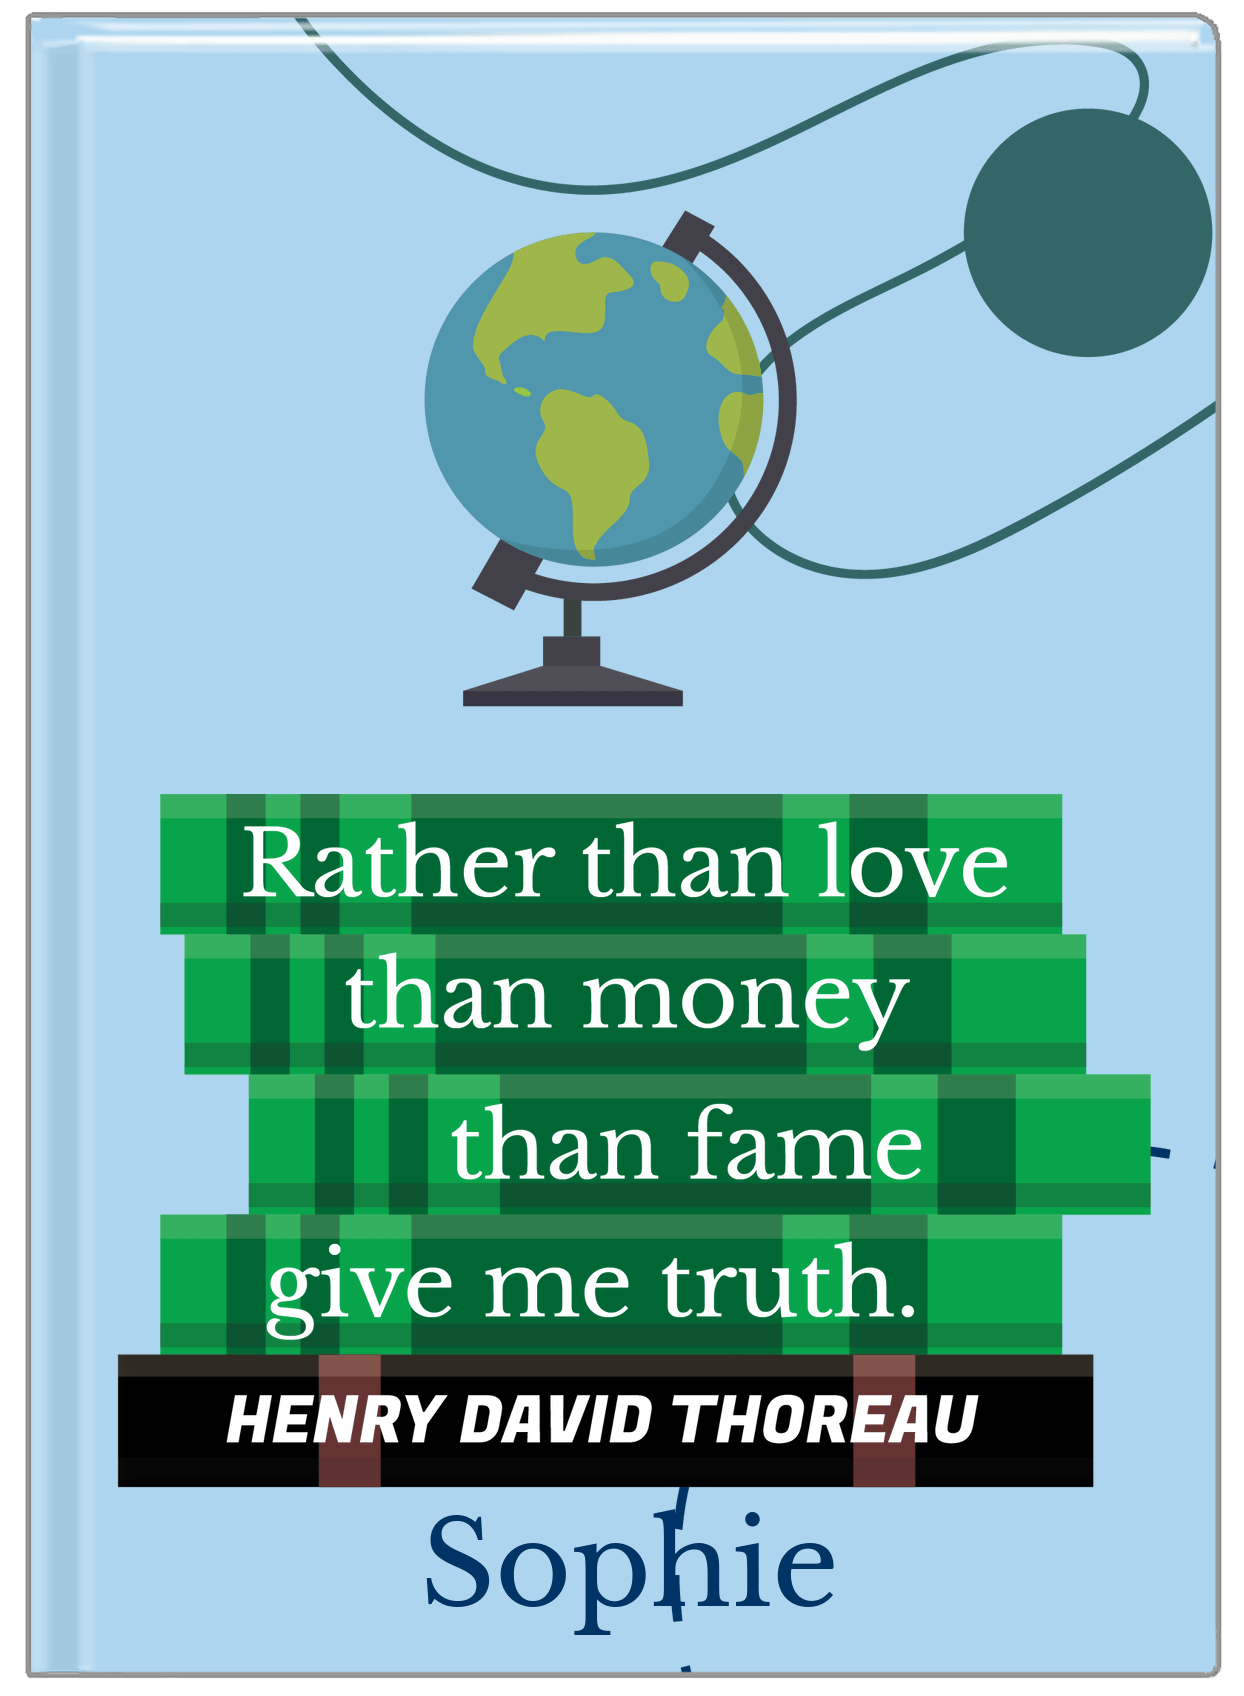 Personalized Famous Quotes Journal - Henry David Thoreau - Front View